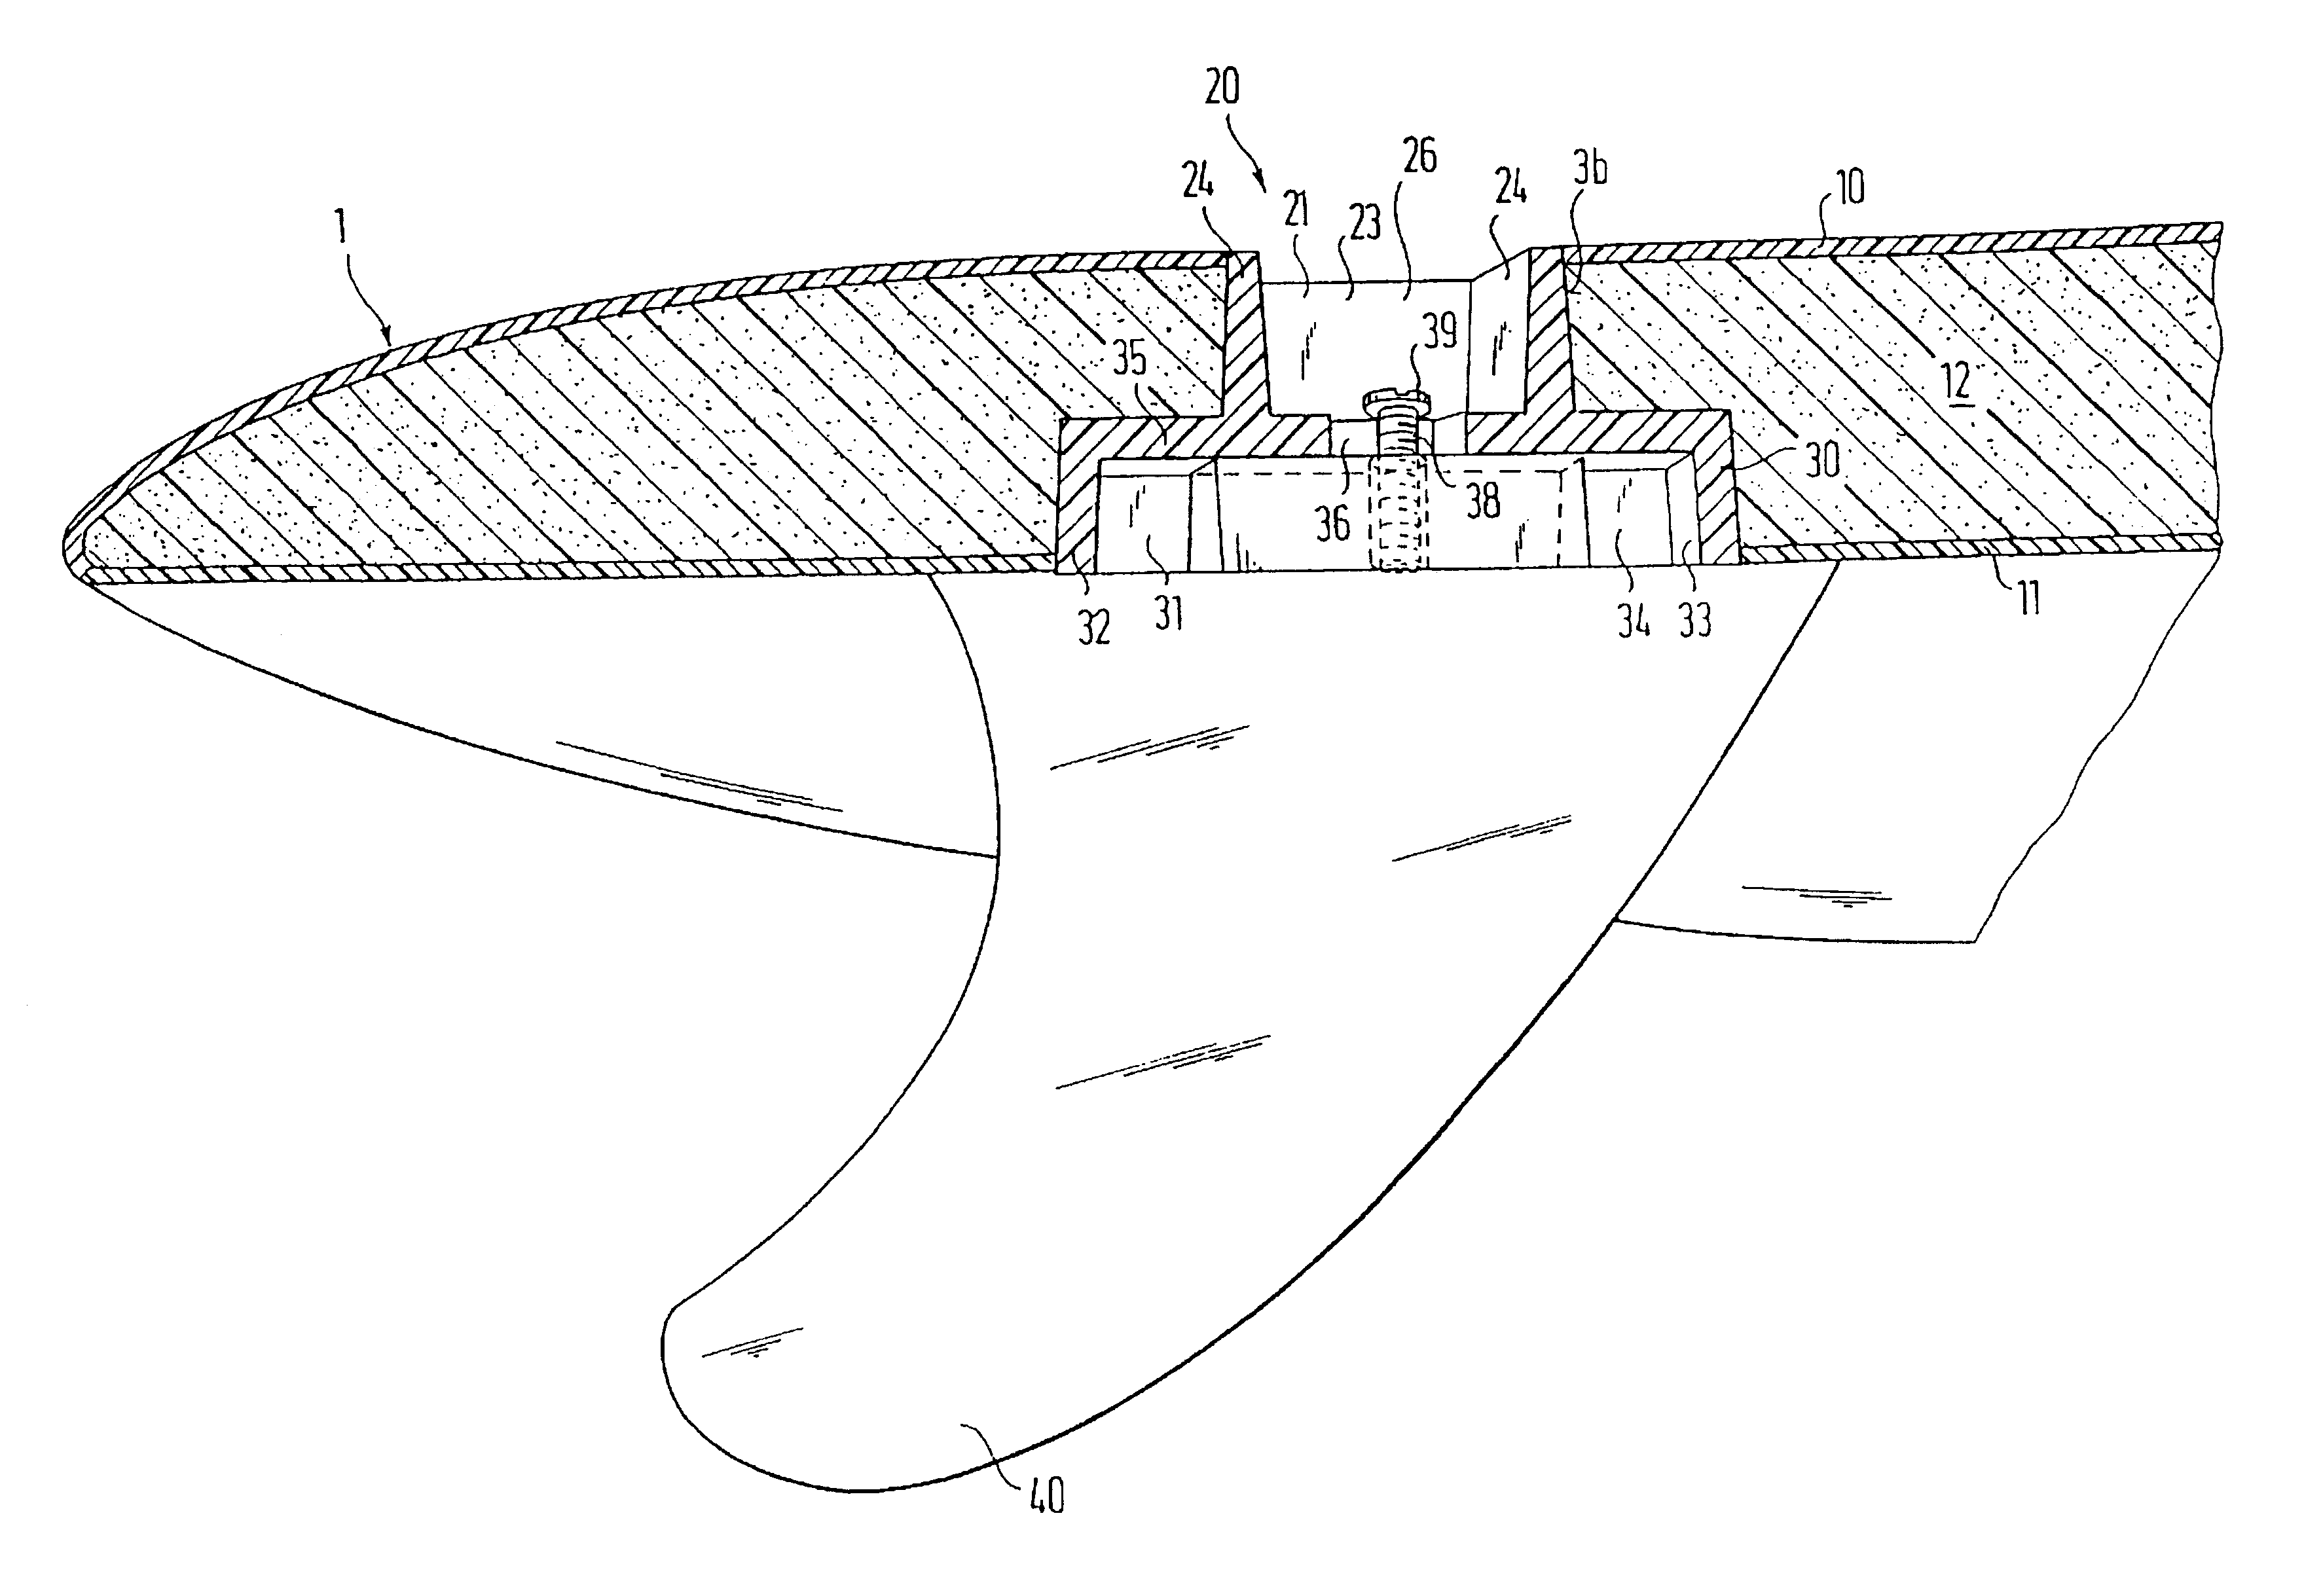 Surf- or sail-board and method of producing the same